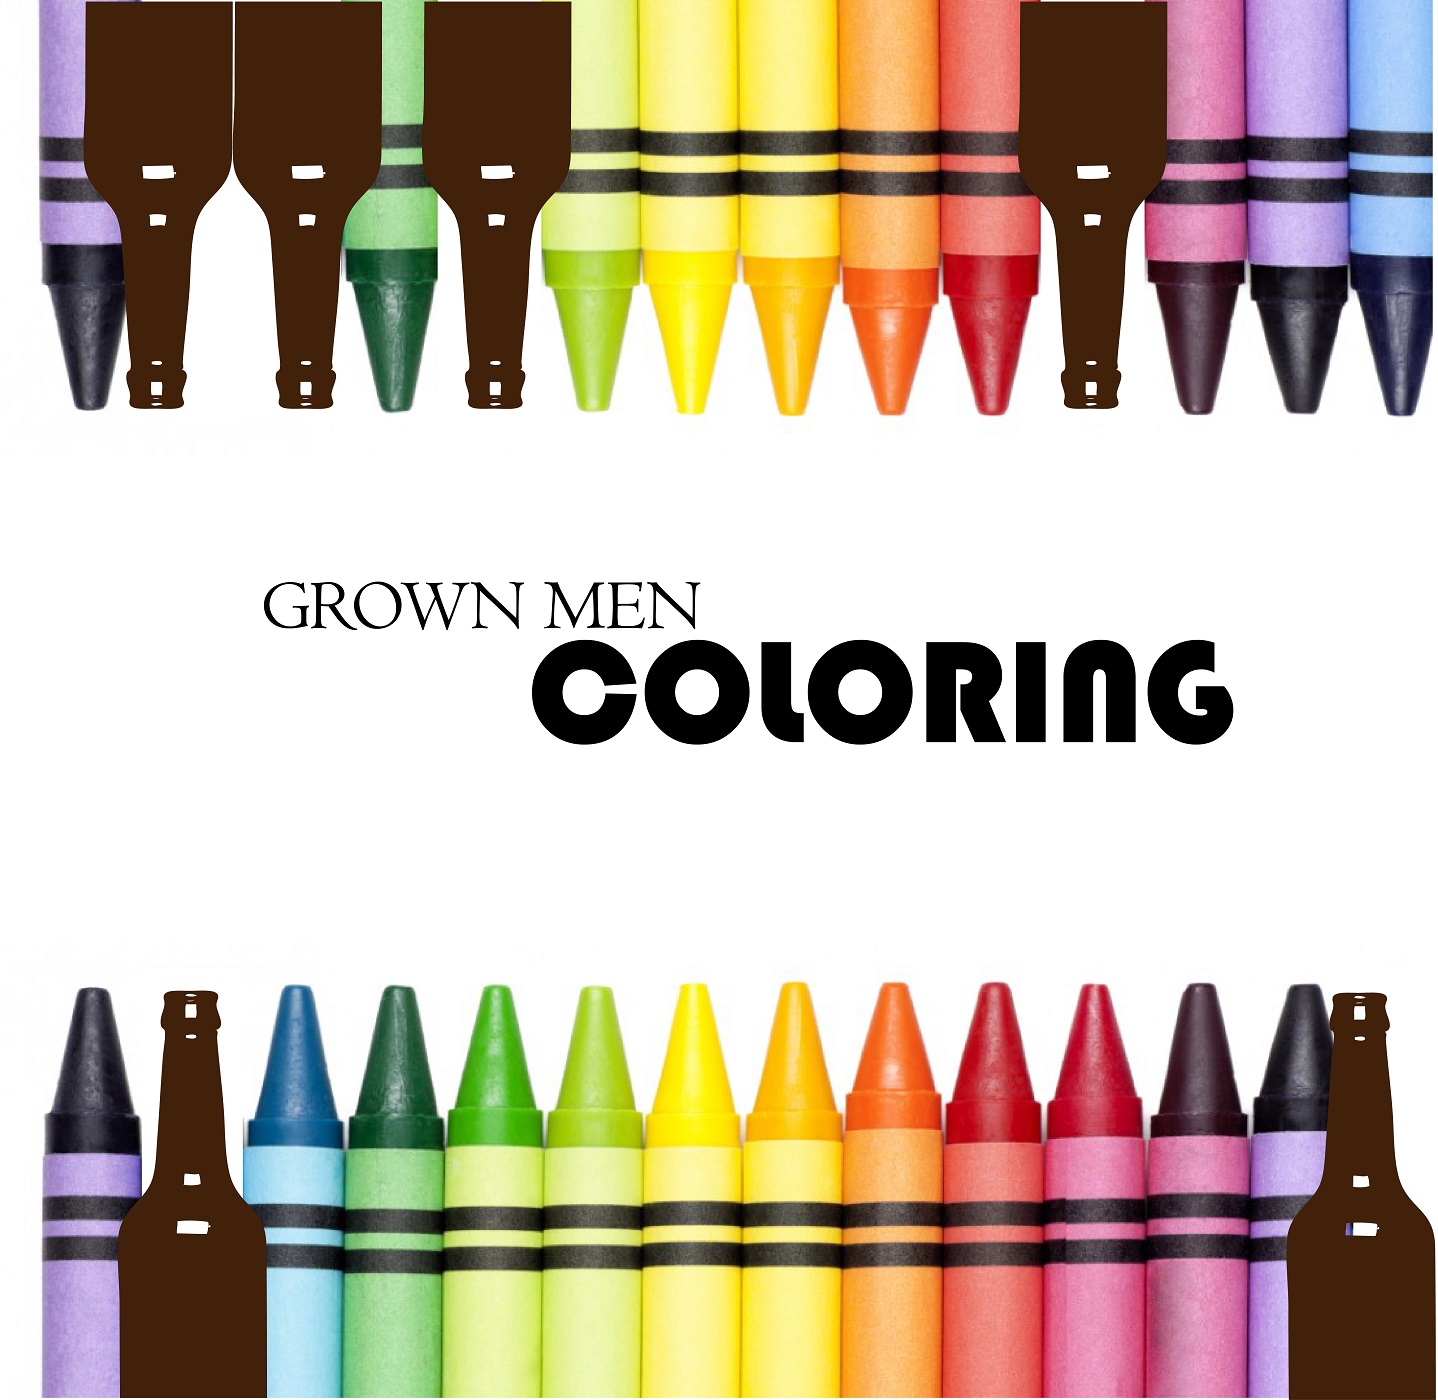 Grown Men Colouring - 064 - Success In Our Failures